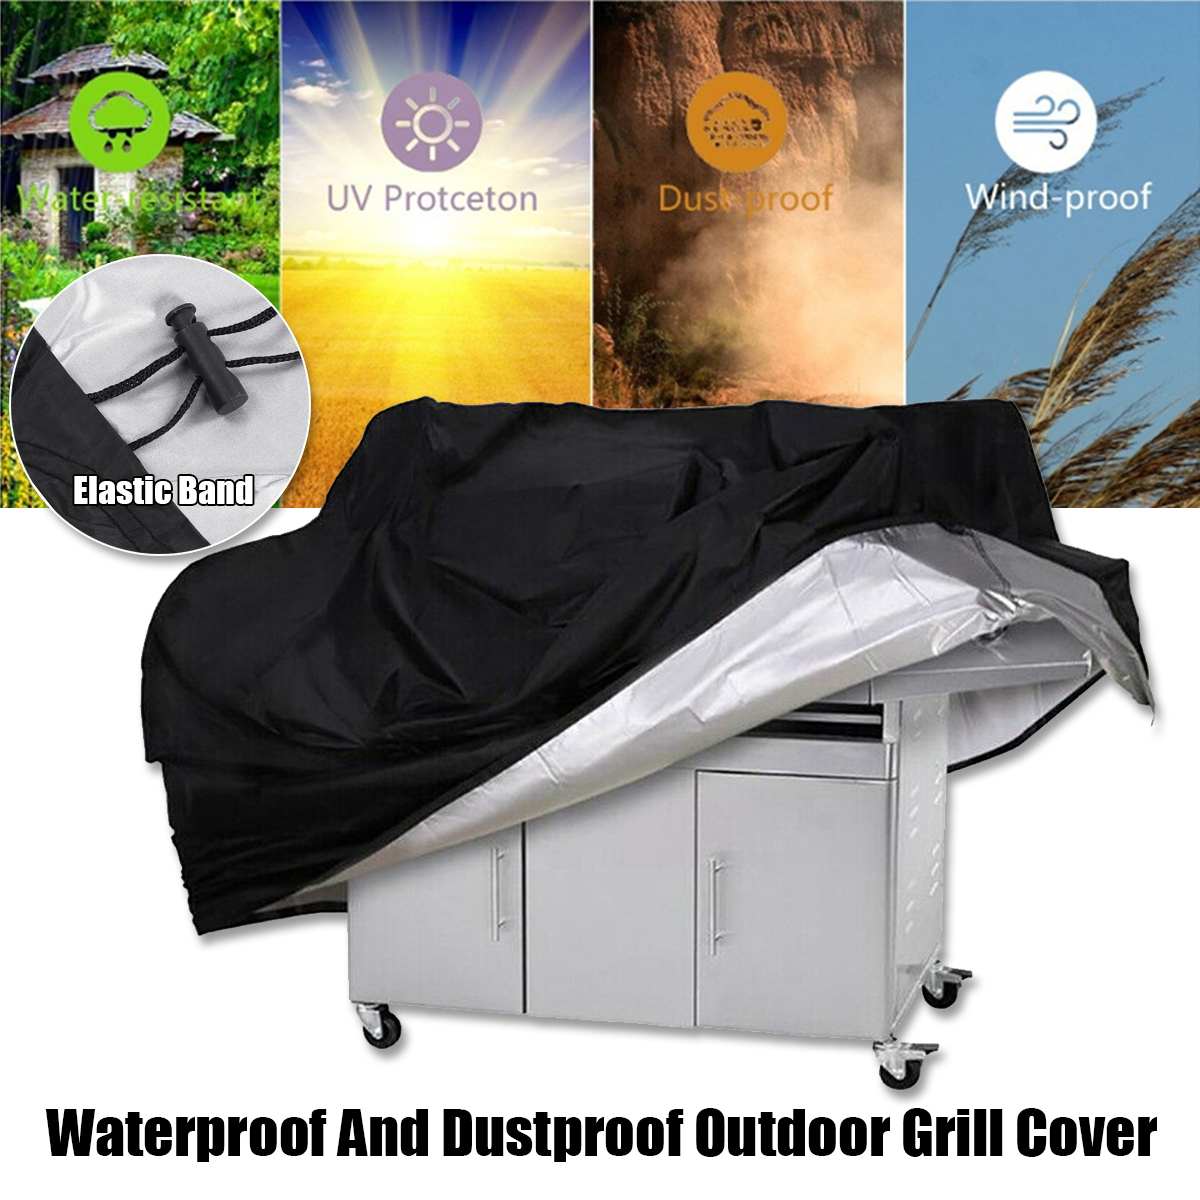 Bbq Cover Waterdichte Outdoor Anti Dust Grill Cover Tuin Yard Rain Protector Voor Bbq Accessoires Zwart Barbecue Grill